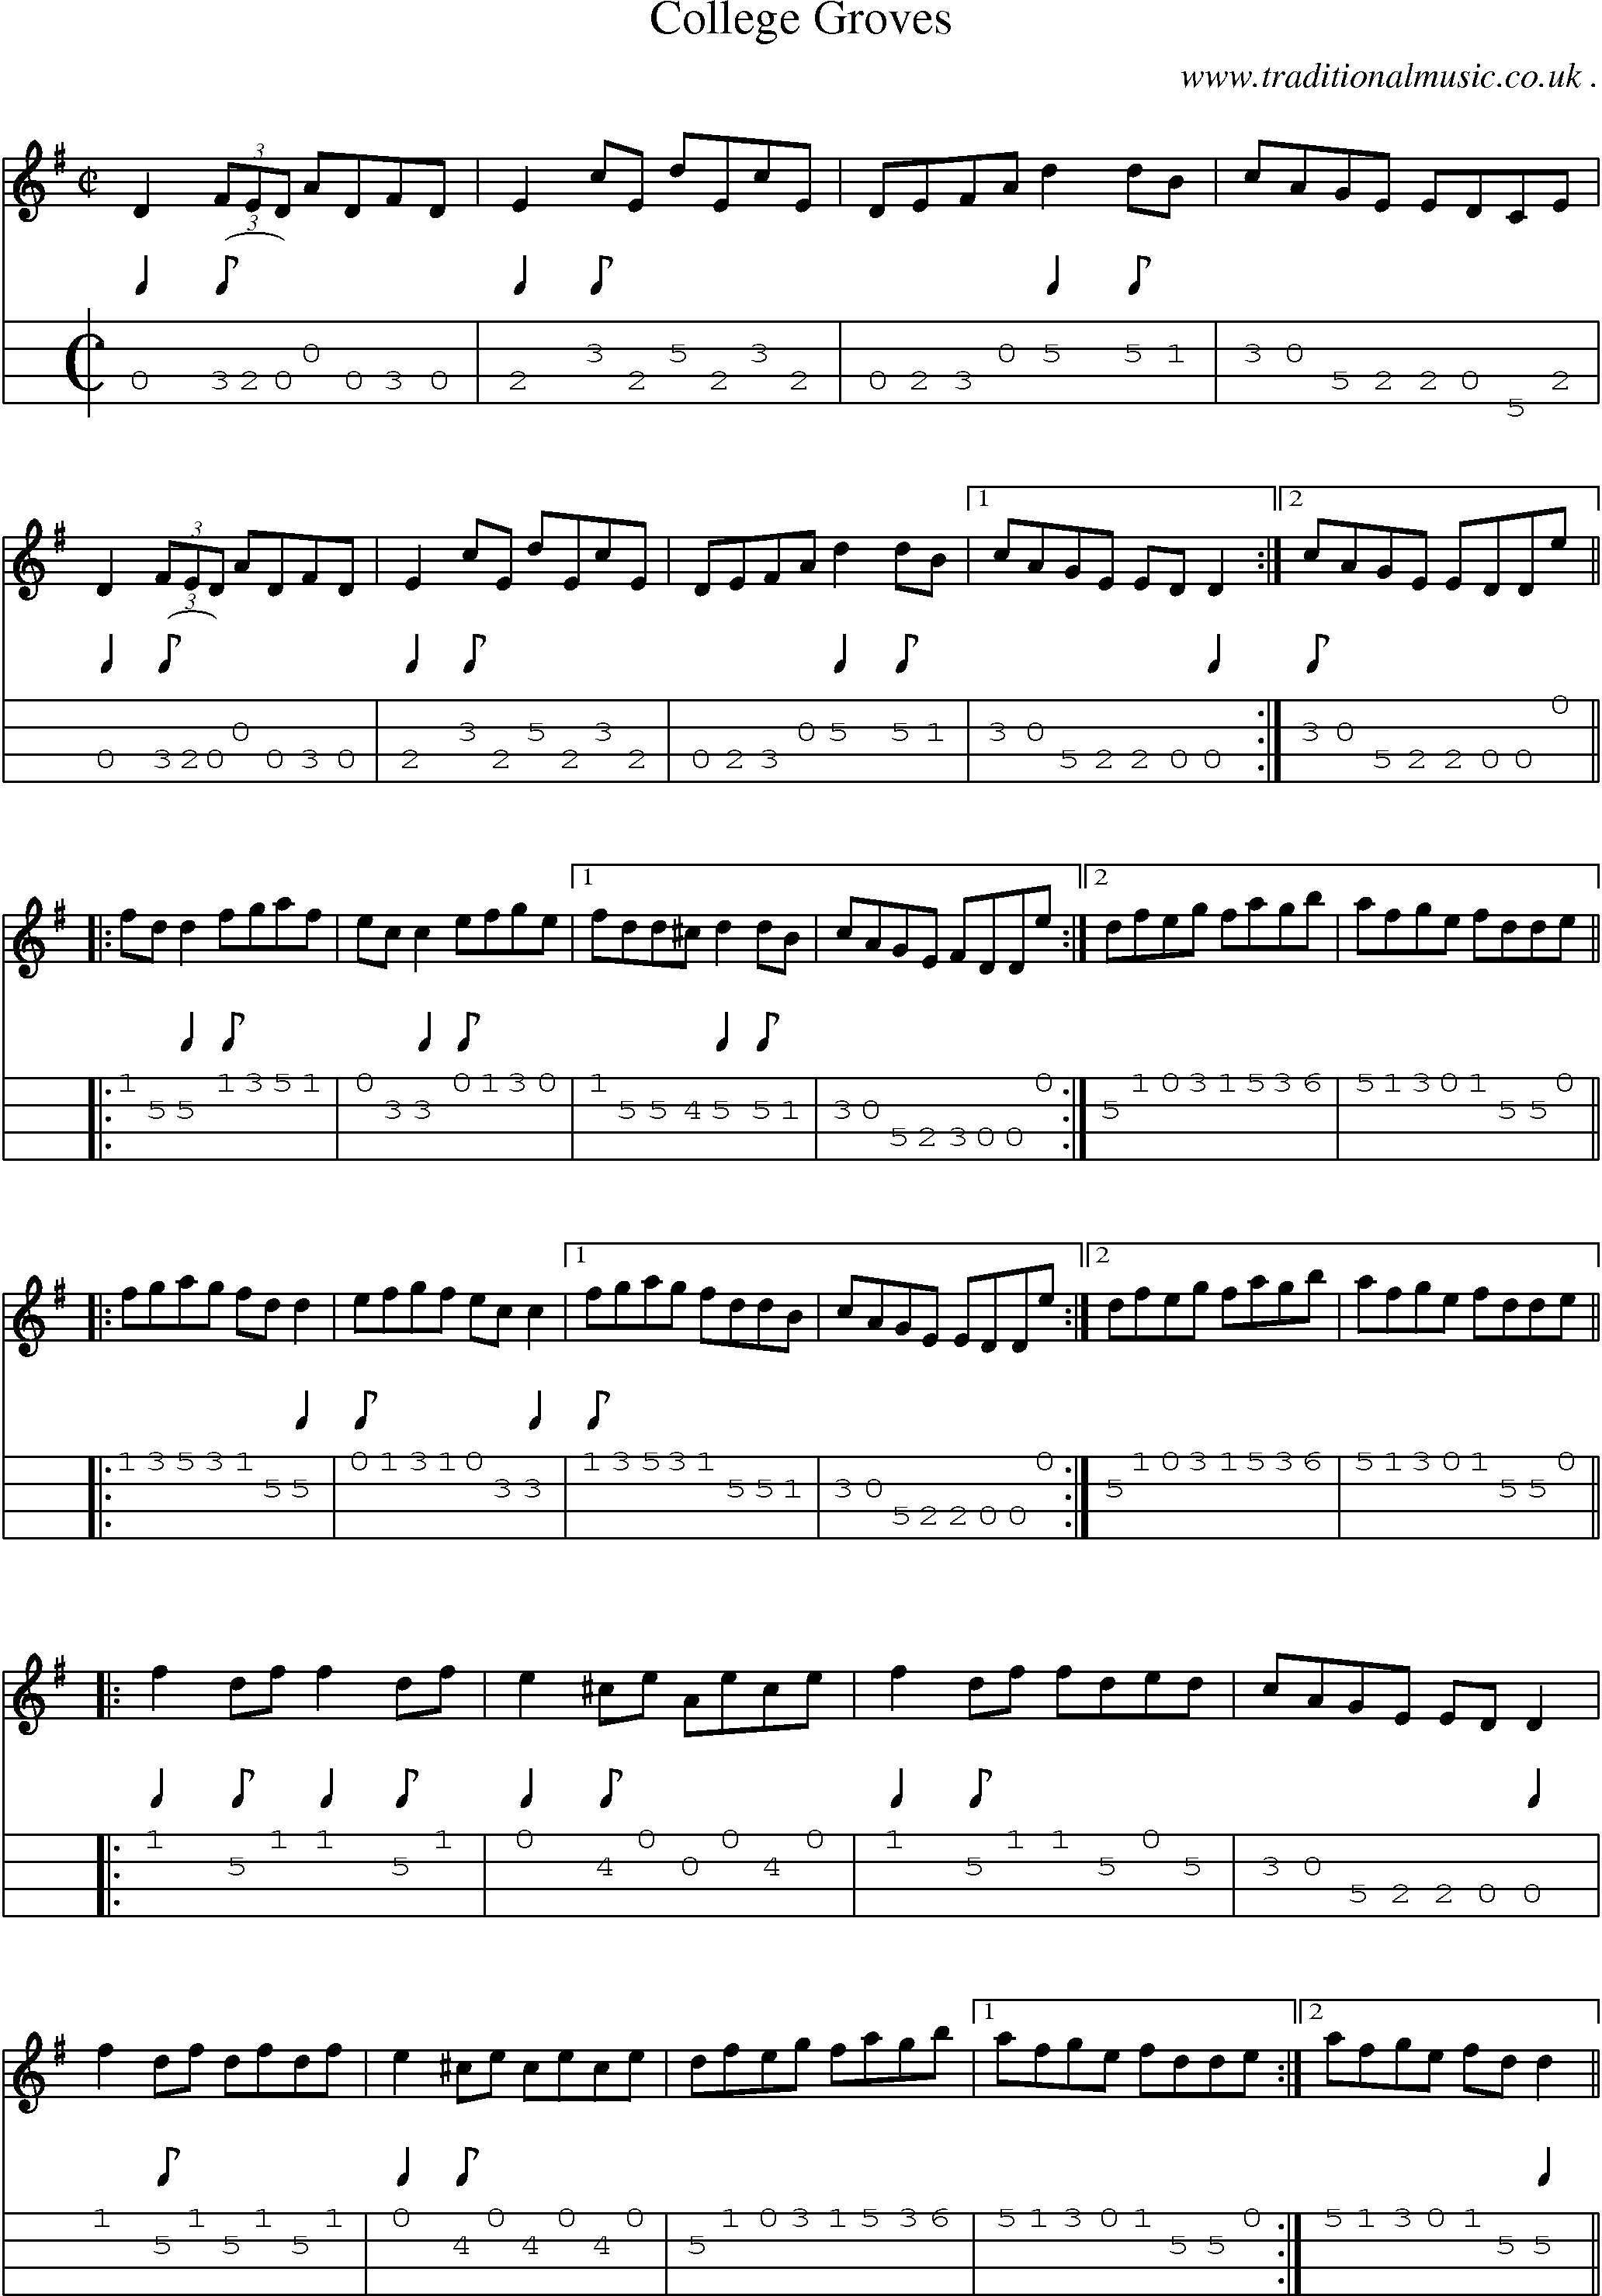 Sheet-Music and Mandolin Tabs for College Groves